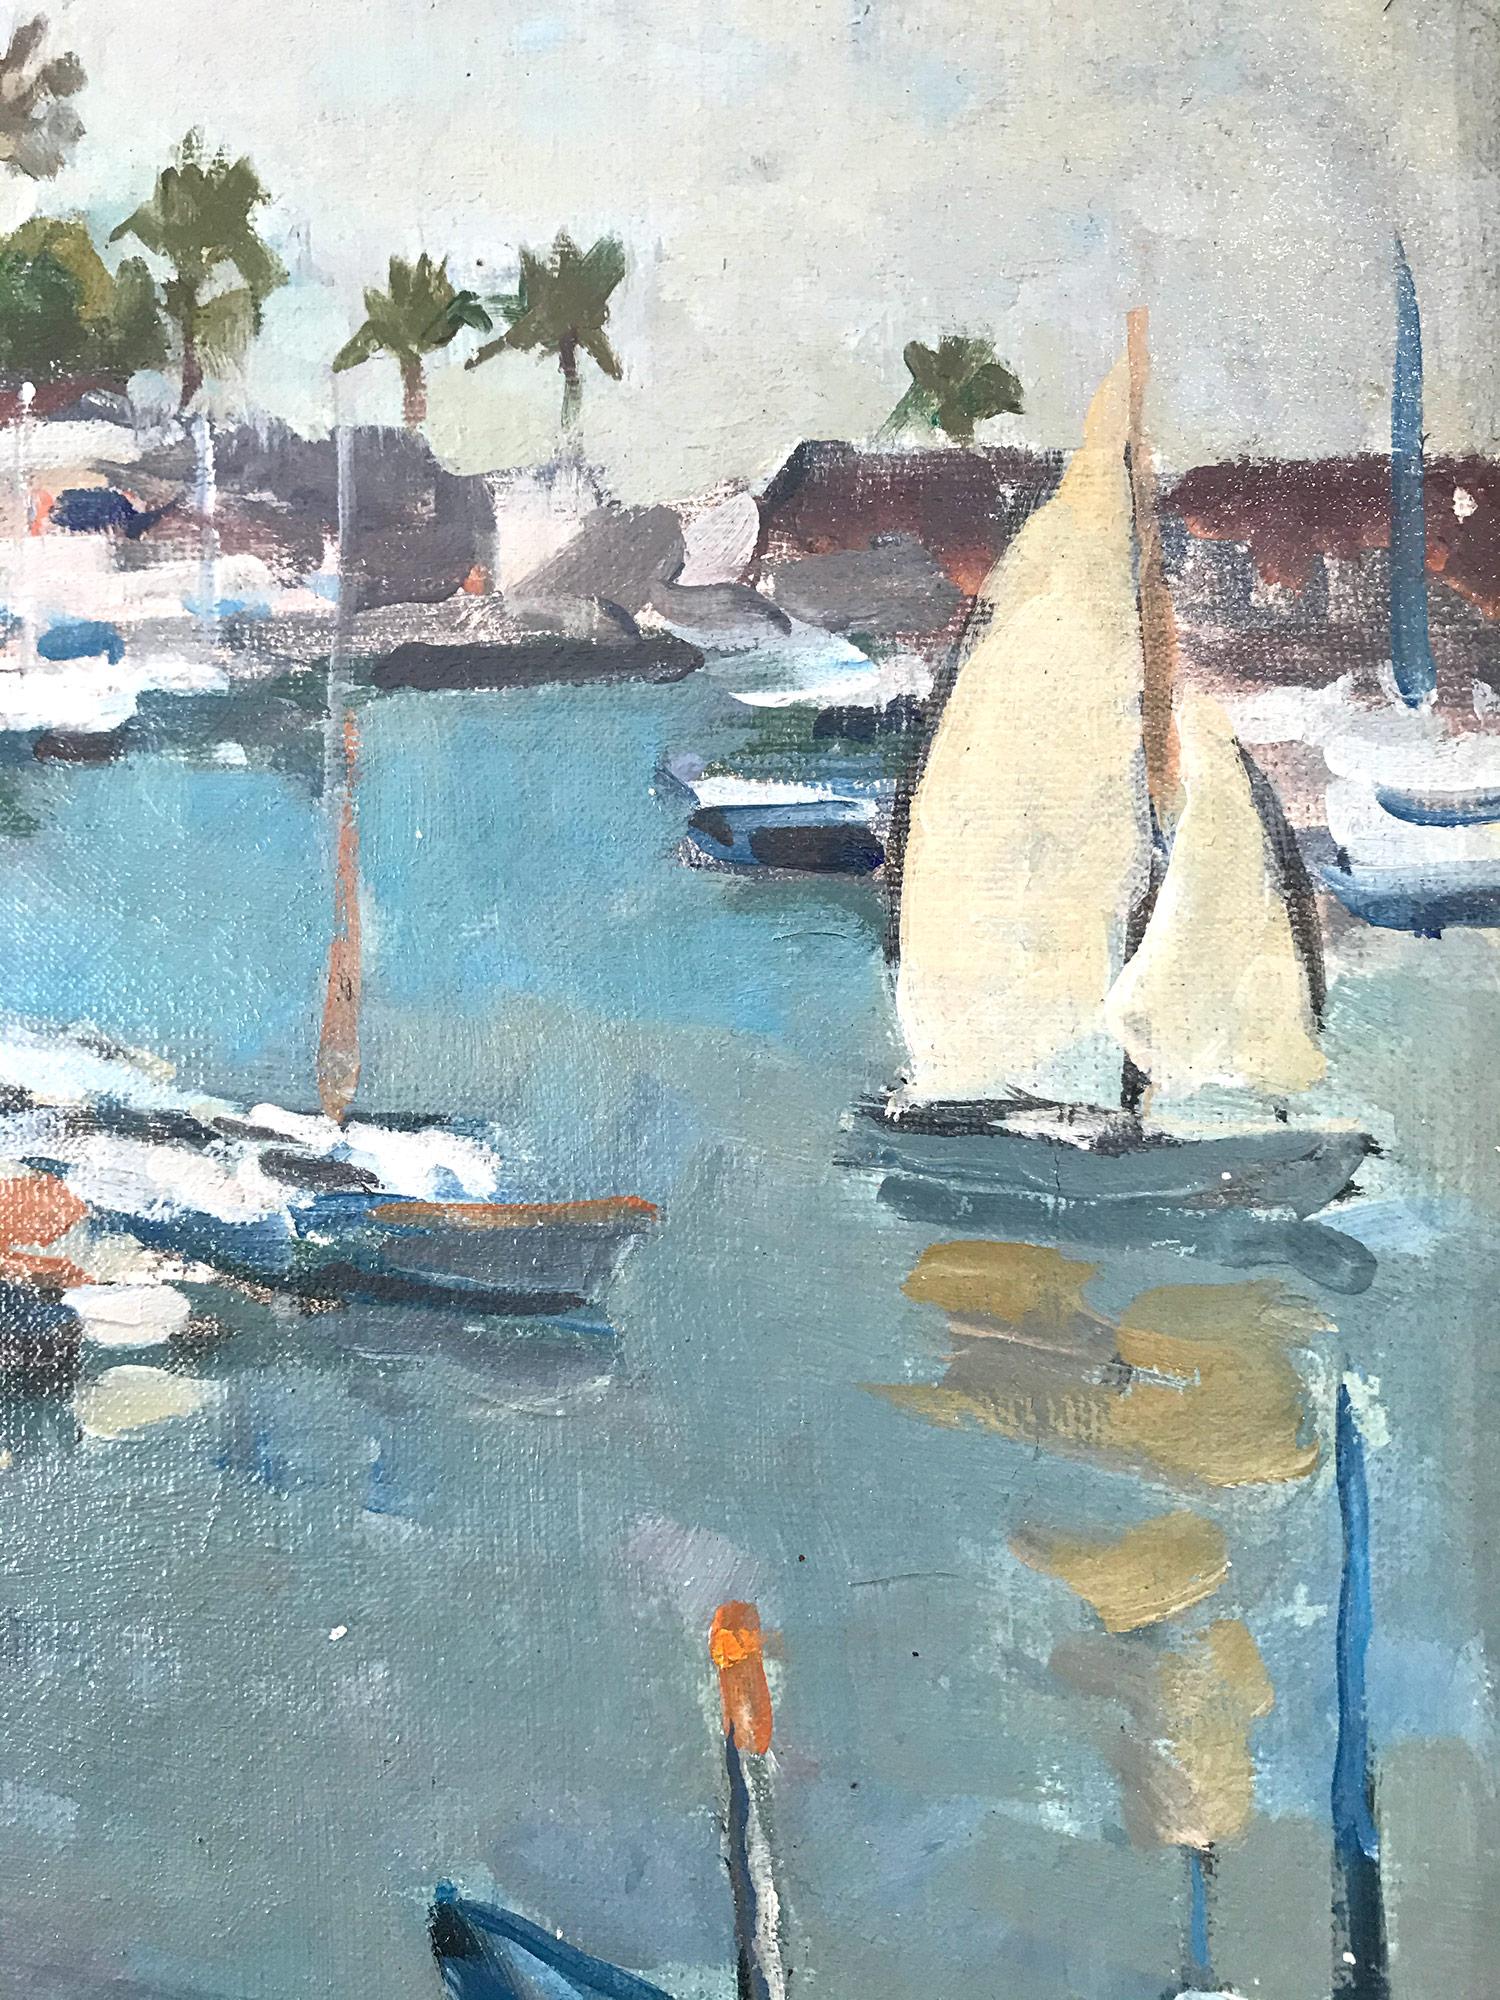 This work by Lucien Adrion is a wonderful representation of his Post-Impressionist works at the seashore by the French Riviera. Using a bright palette of colors, Adrion executes this piece with much attention to detail with many boats situated along